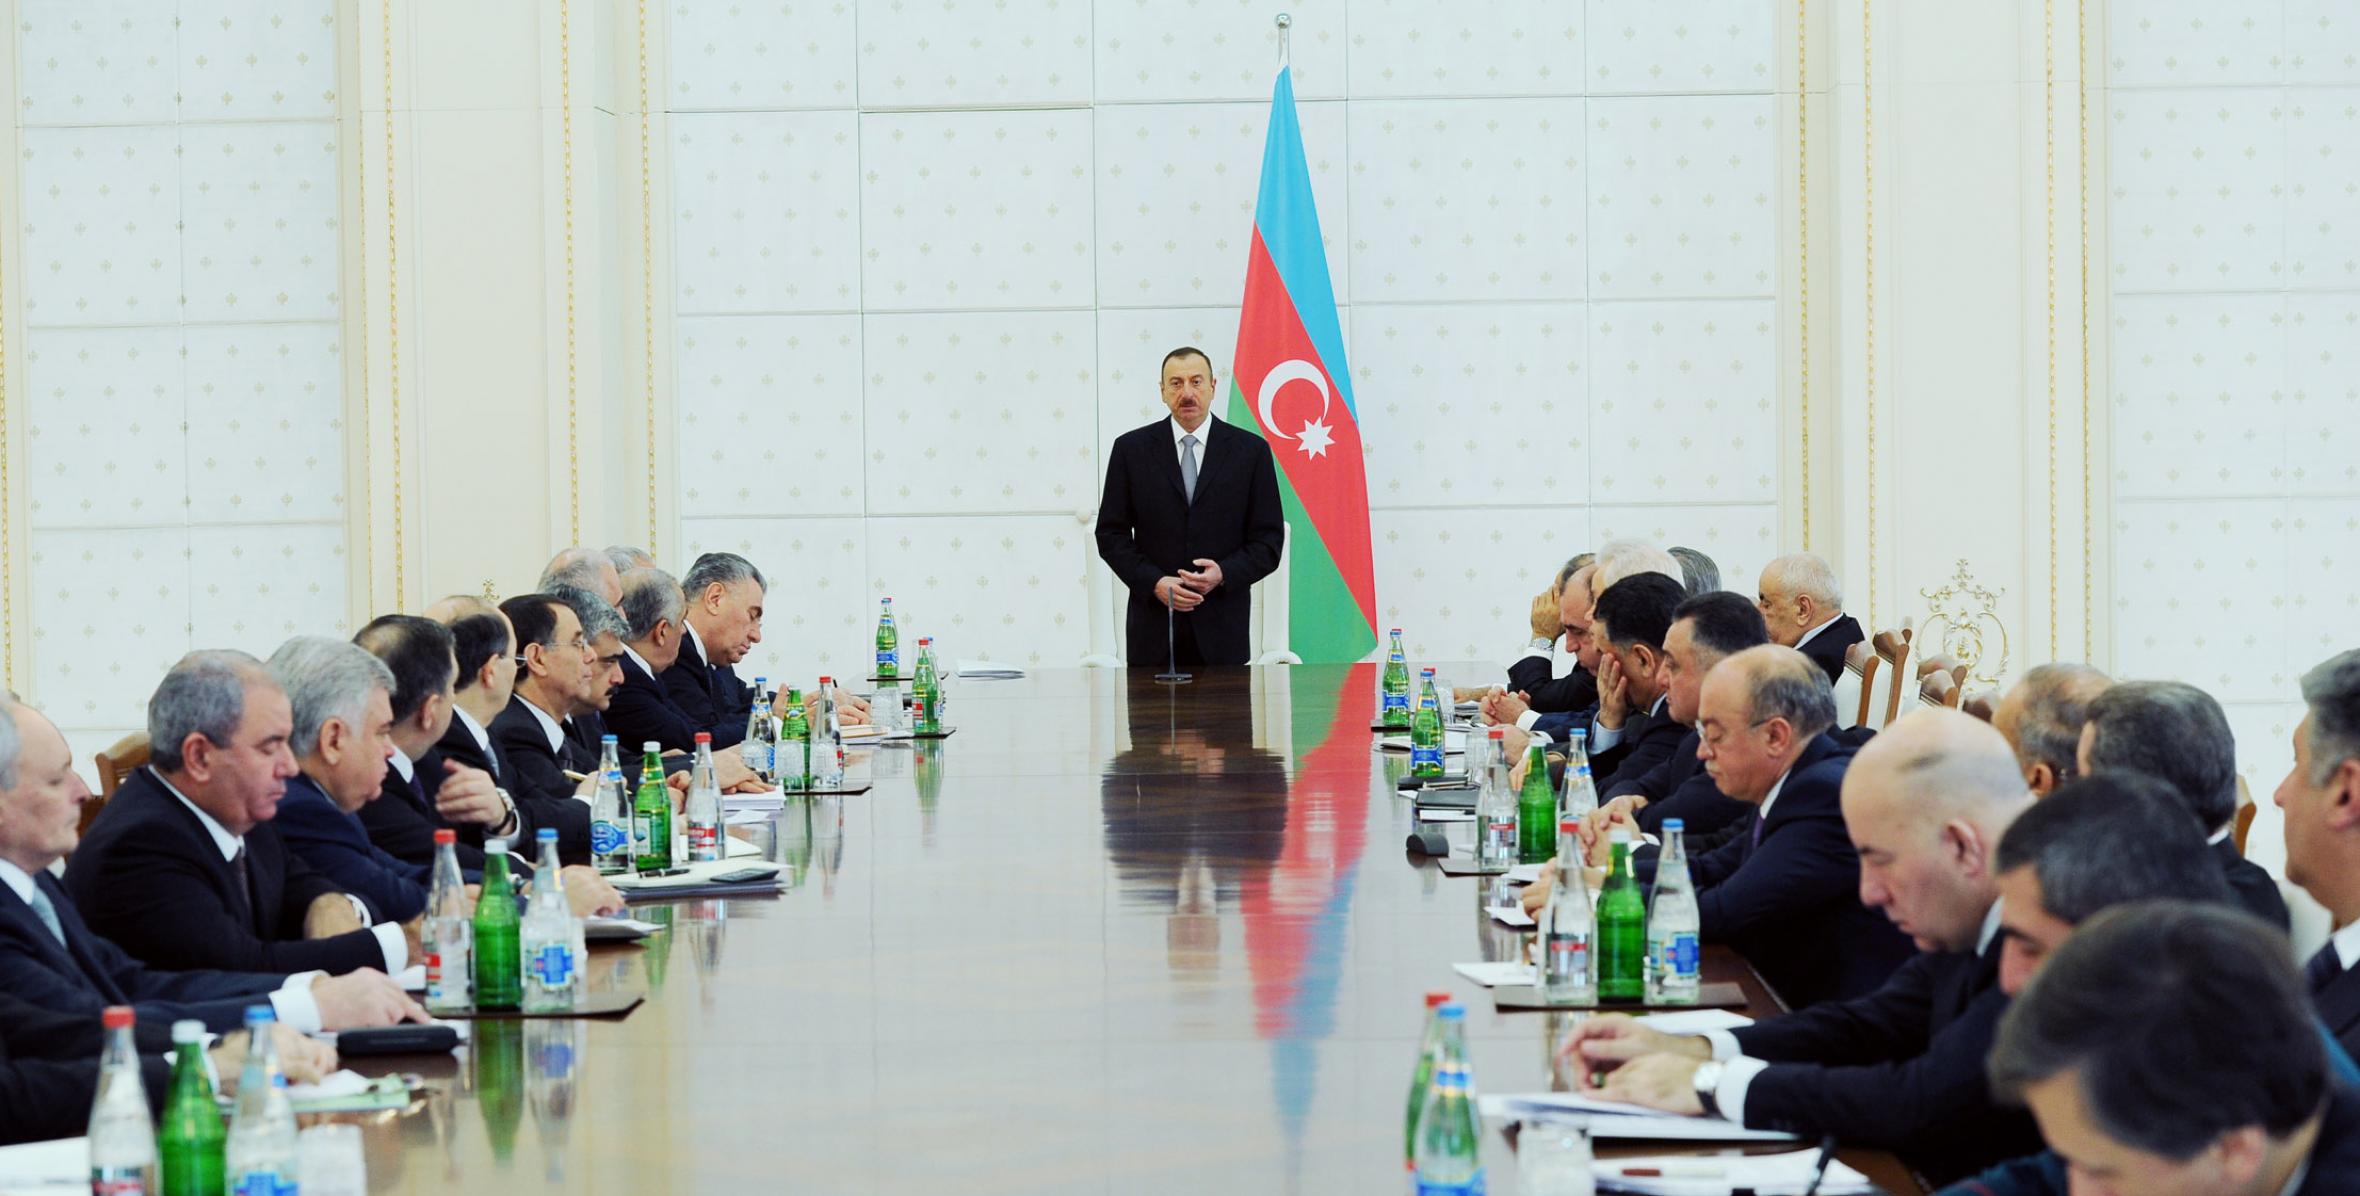 Closing speech by Ilham Aliyev at the meeting of the Cabinet of Ministers on the results of socioeconomic development in 2012 and objectives for 2013